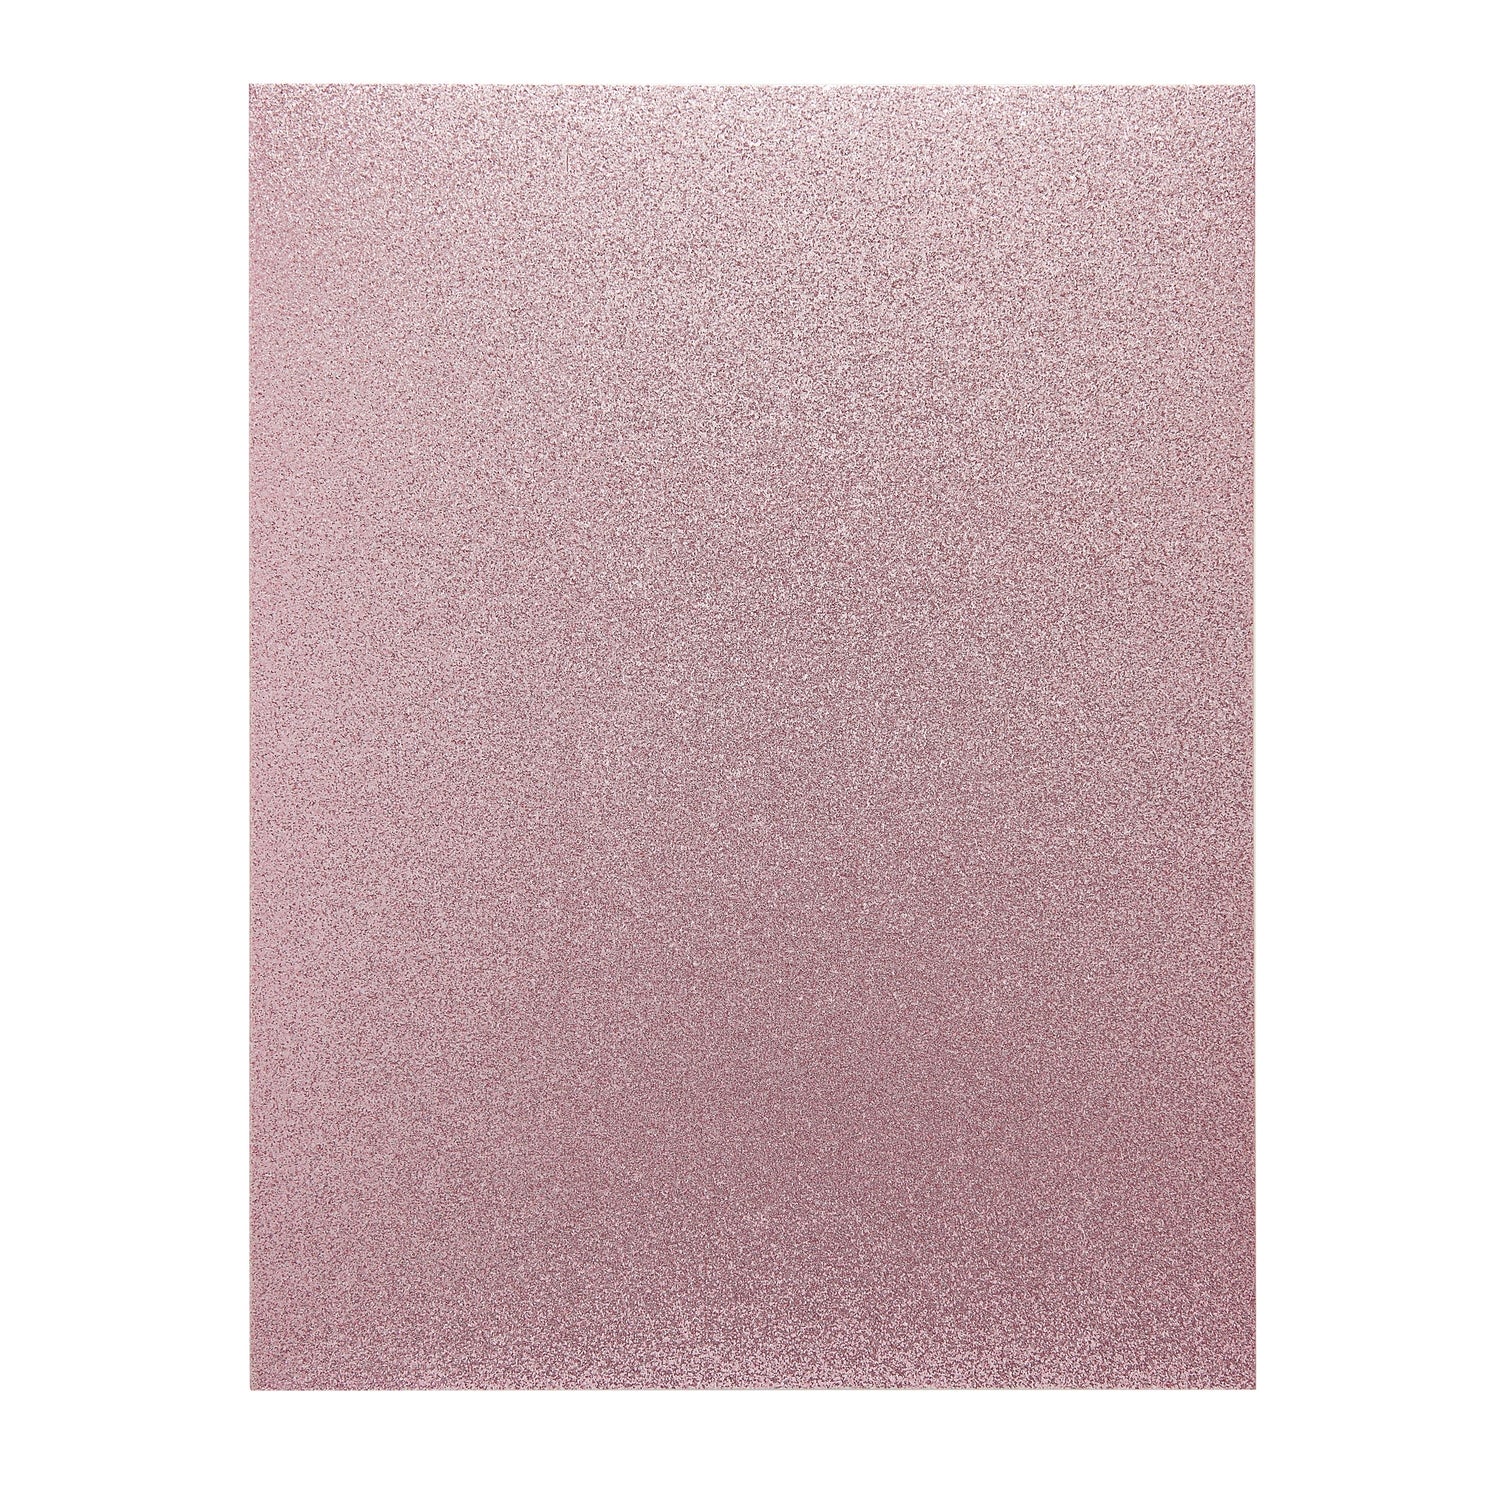 Bright Creations 30 Sheets Double-Sided Pink Glitter Cardstock Paper for DIY Crafts, Card Making, Invitations, 300gsm, 8.5 x 11 in